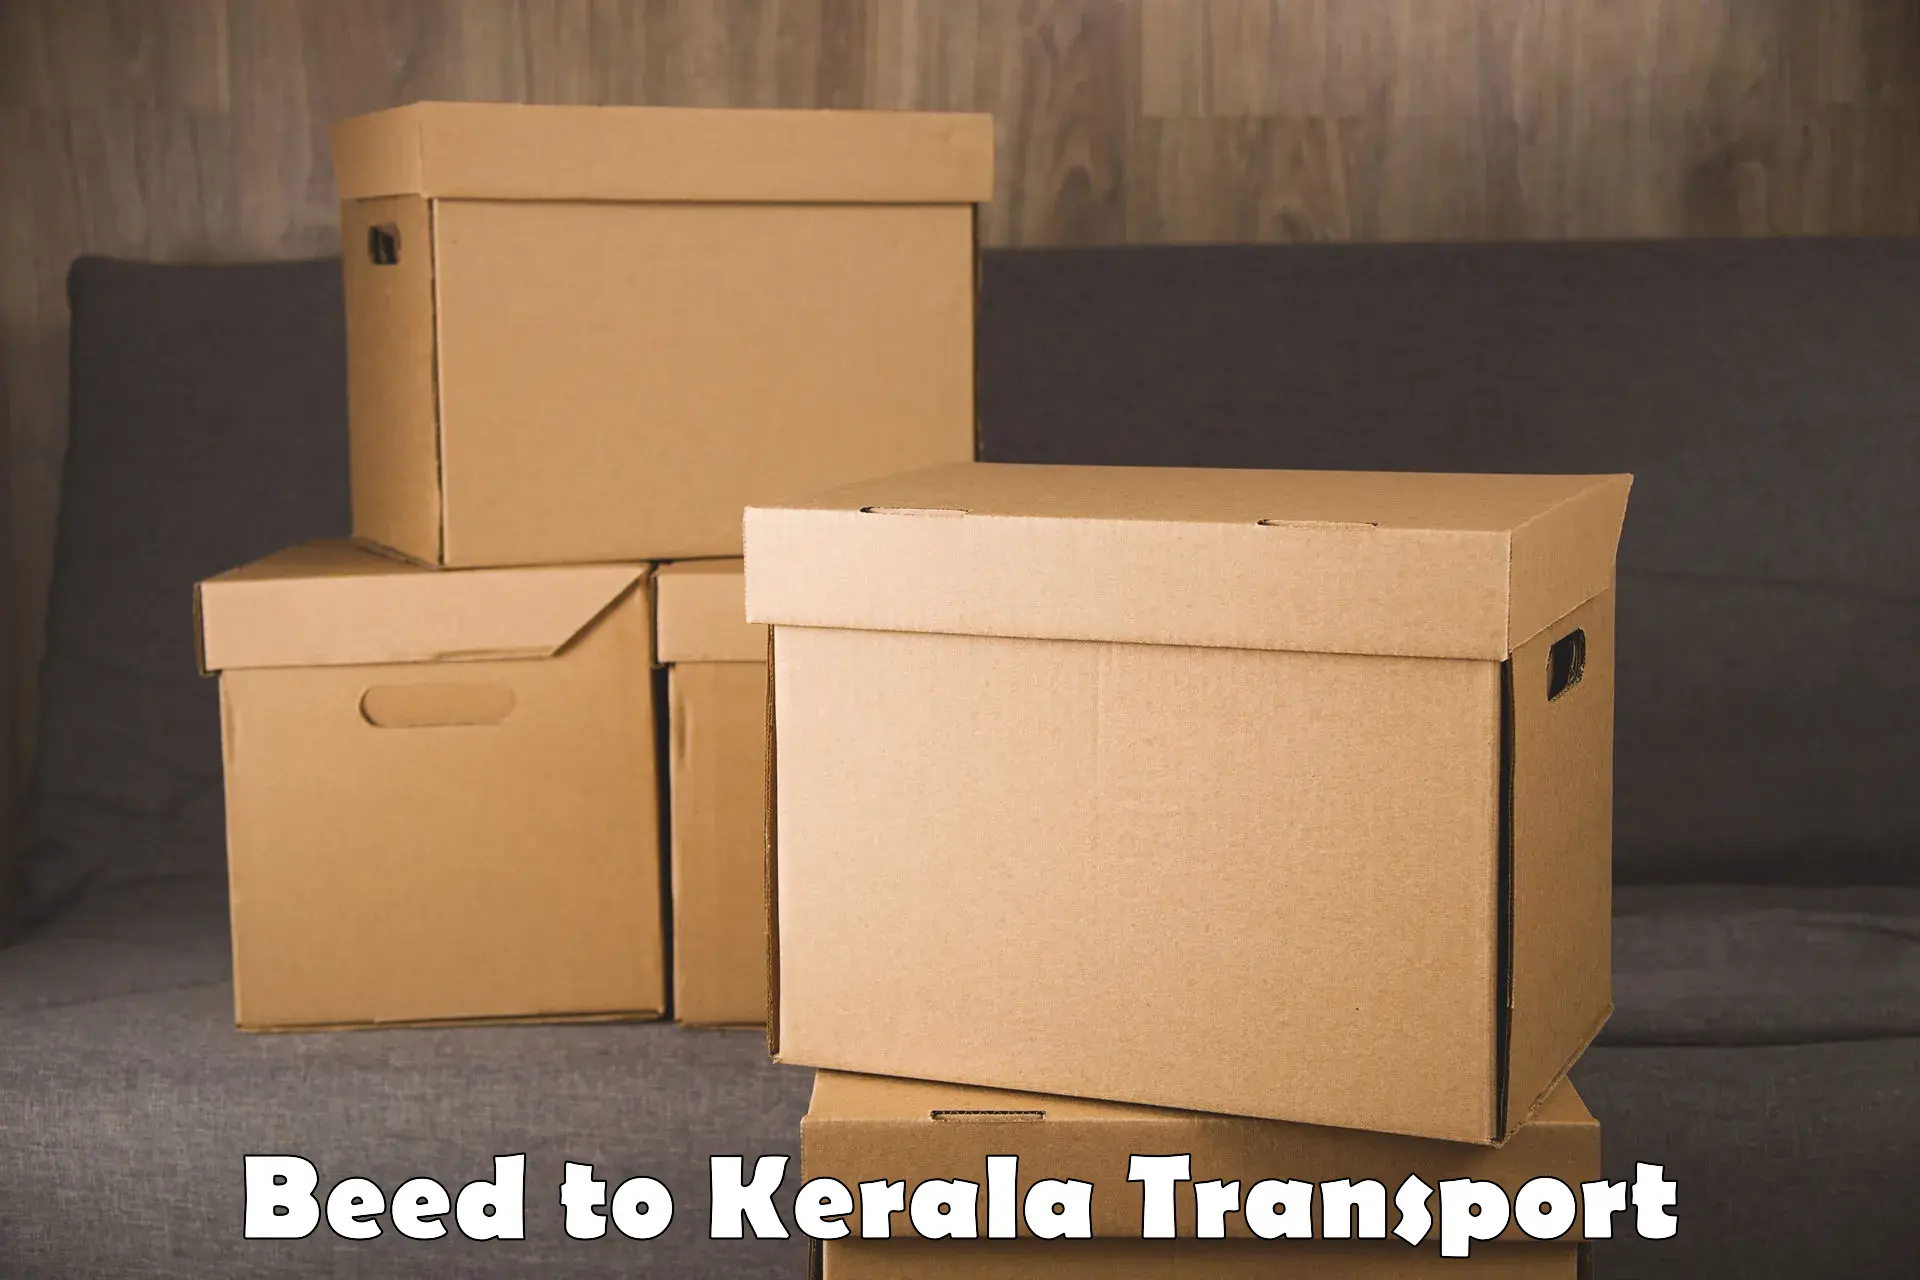 Online transport service Beed to Nallepilly